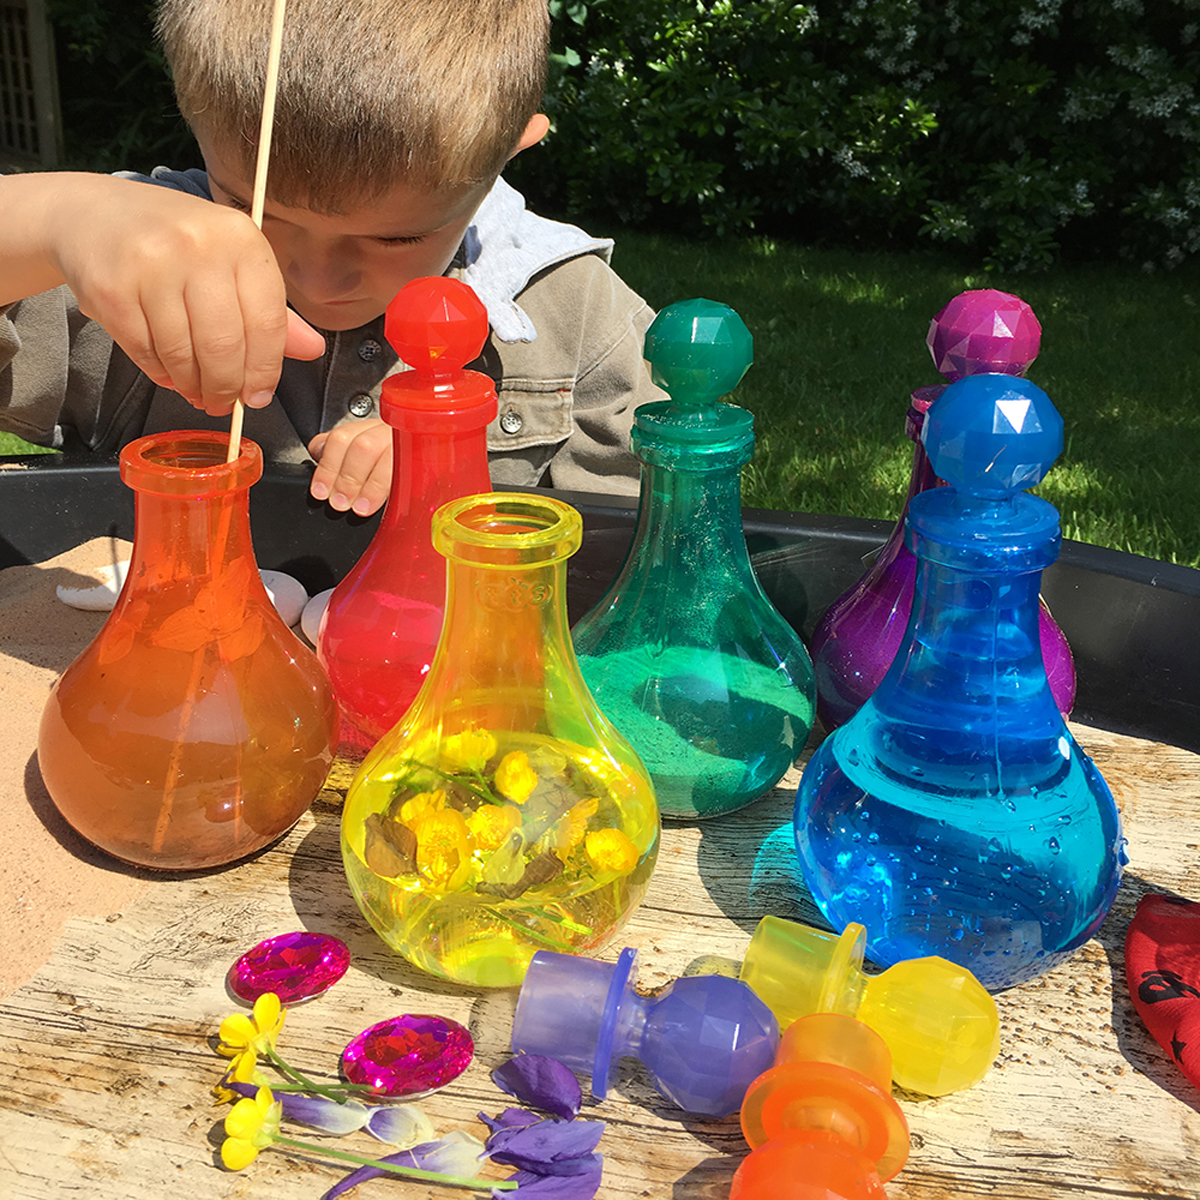 spring time play and learn activities outdoors